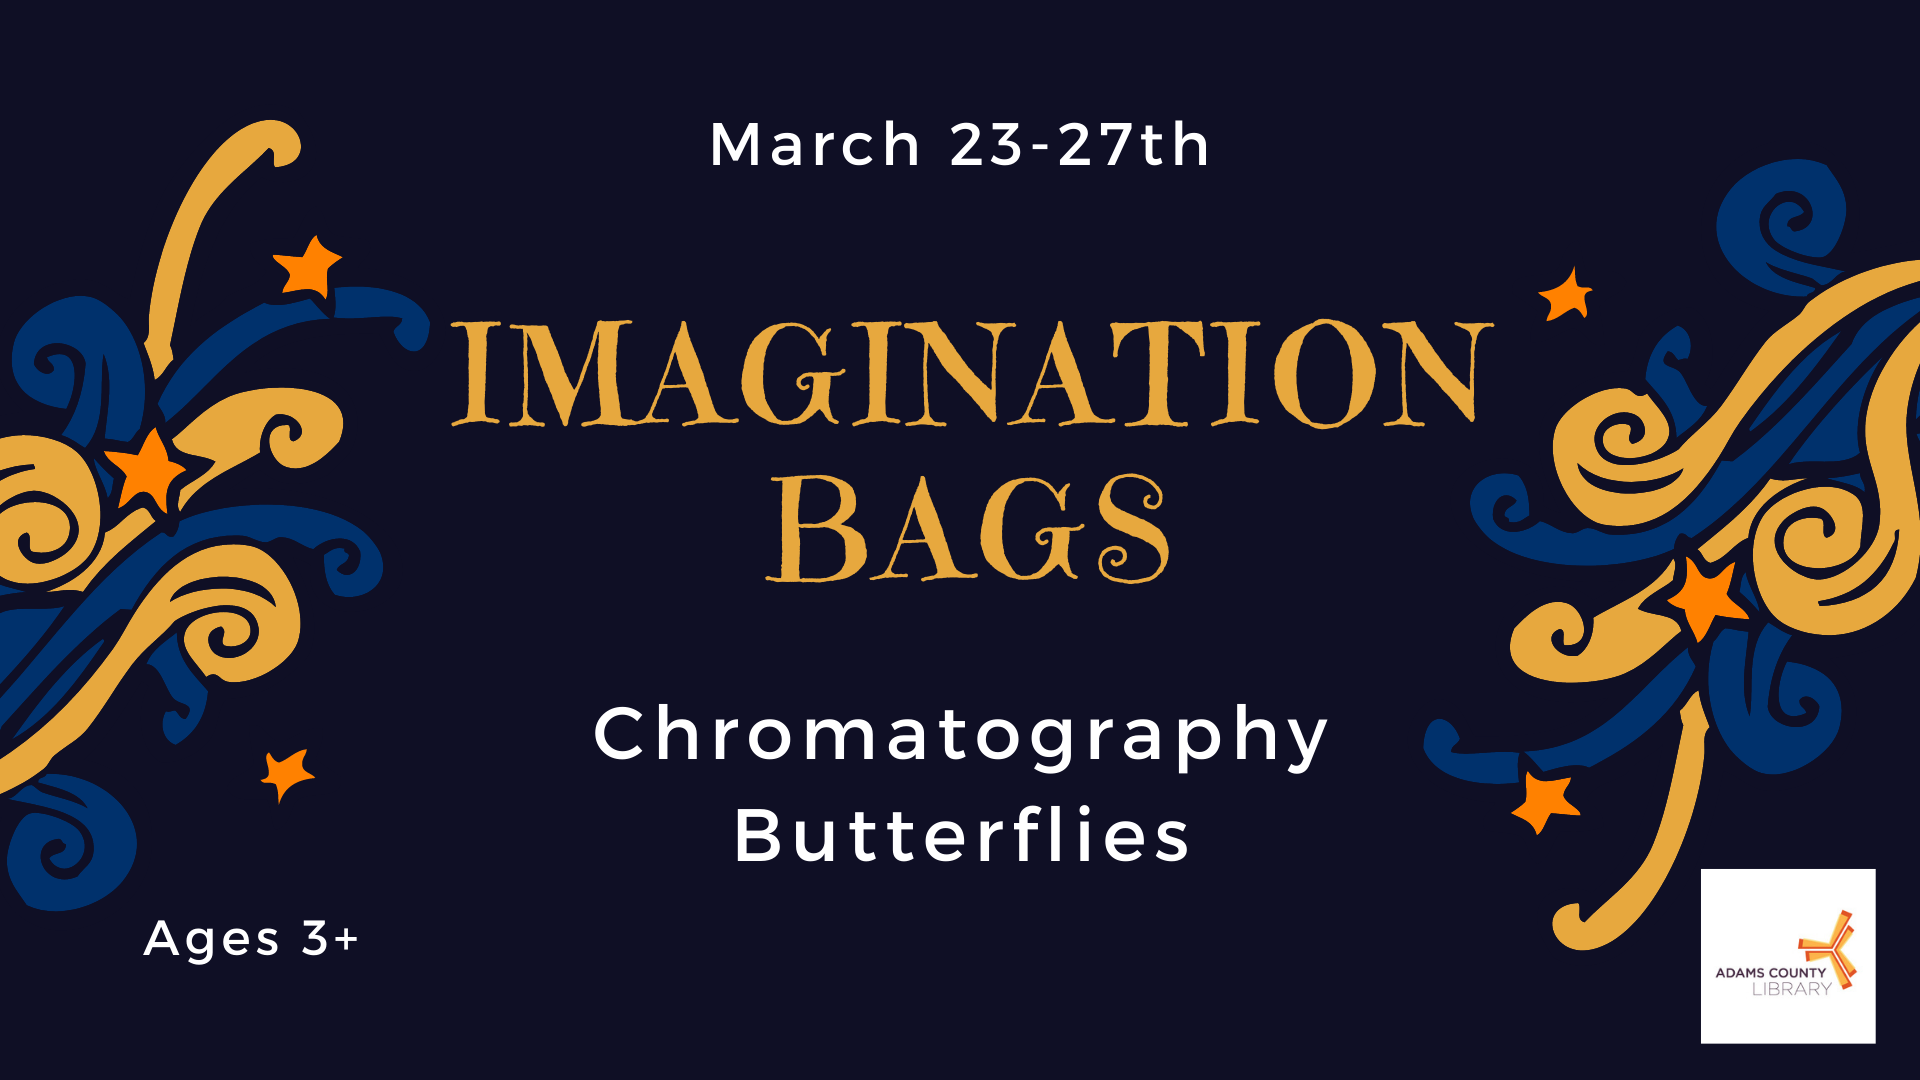 Pick up an Imagination Bag from March 23rd through March 27th. This month we are making Chromatography Butterflies!!